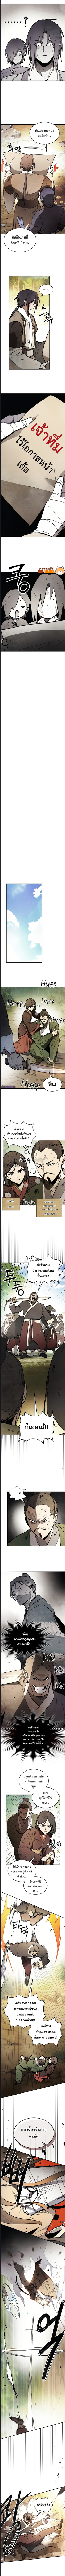 Chronicles Of The Martial Godโ€s Return เธ•เธญเธเธ—เธตเน 52 (3)